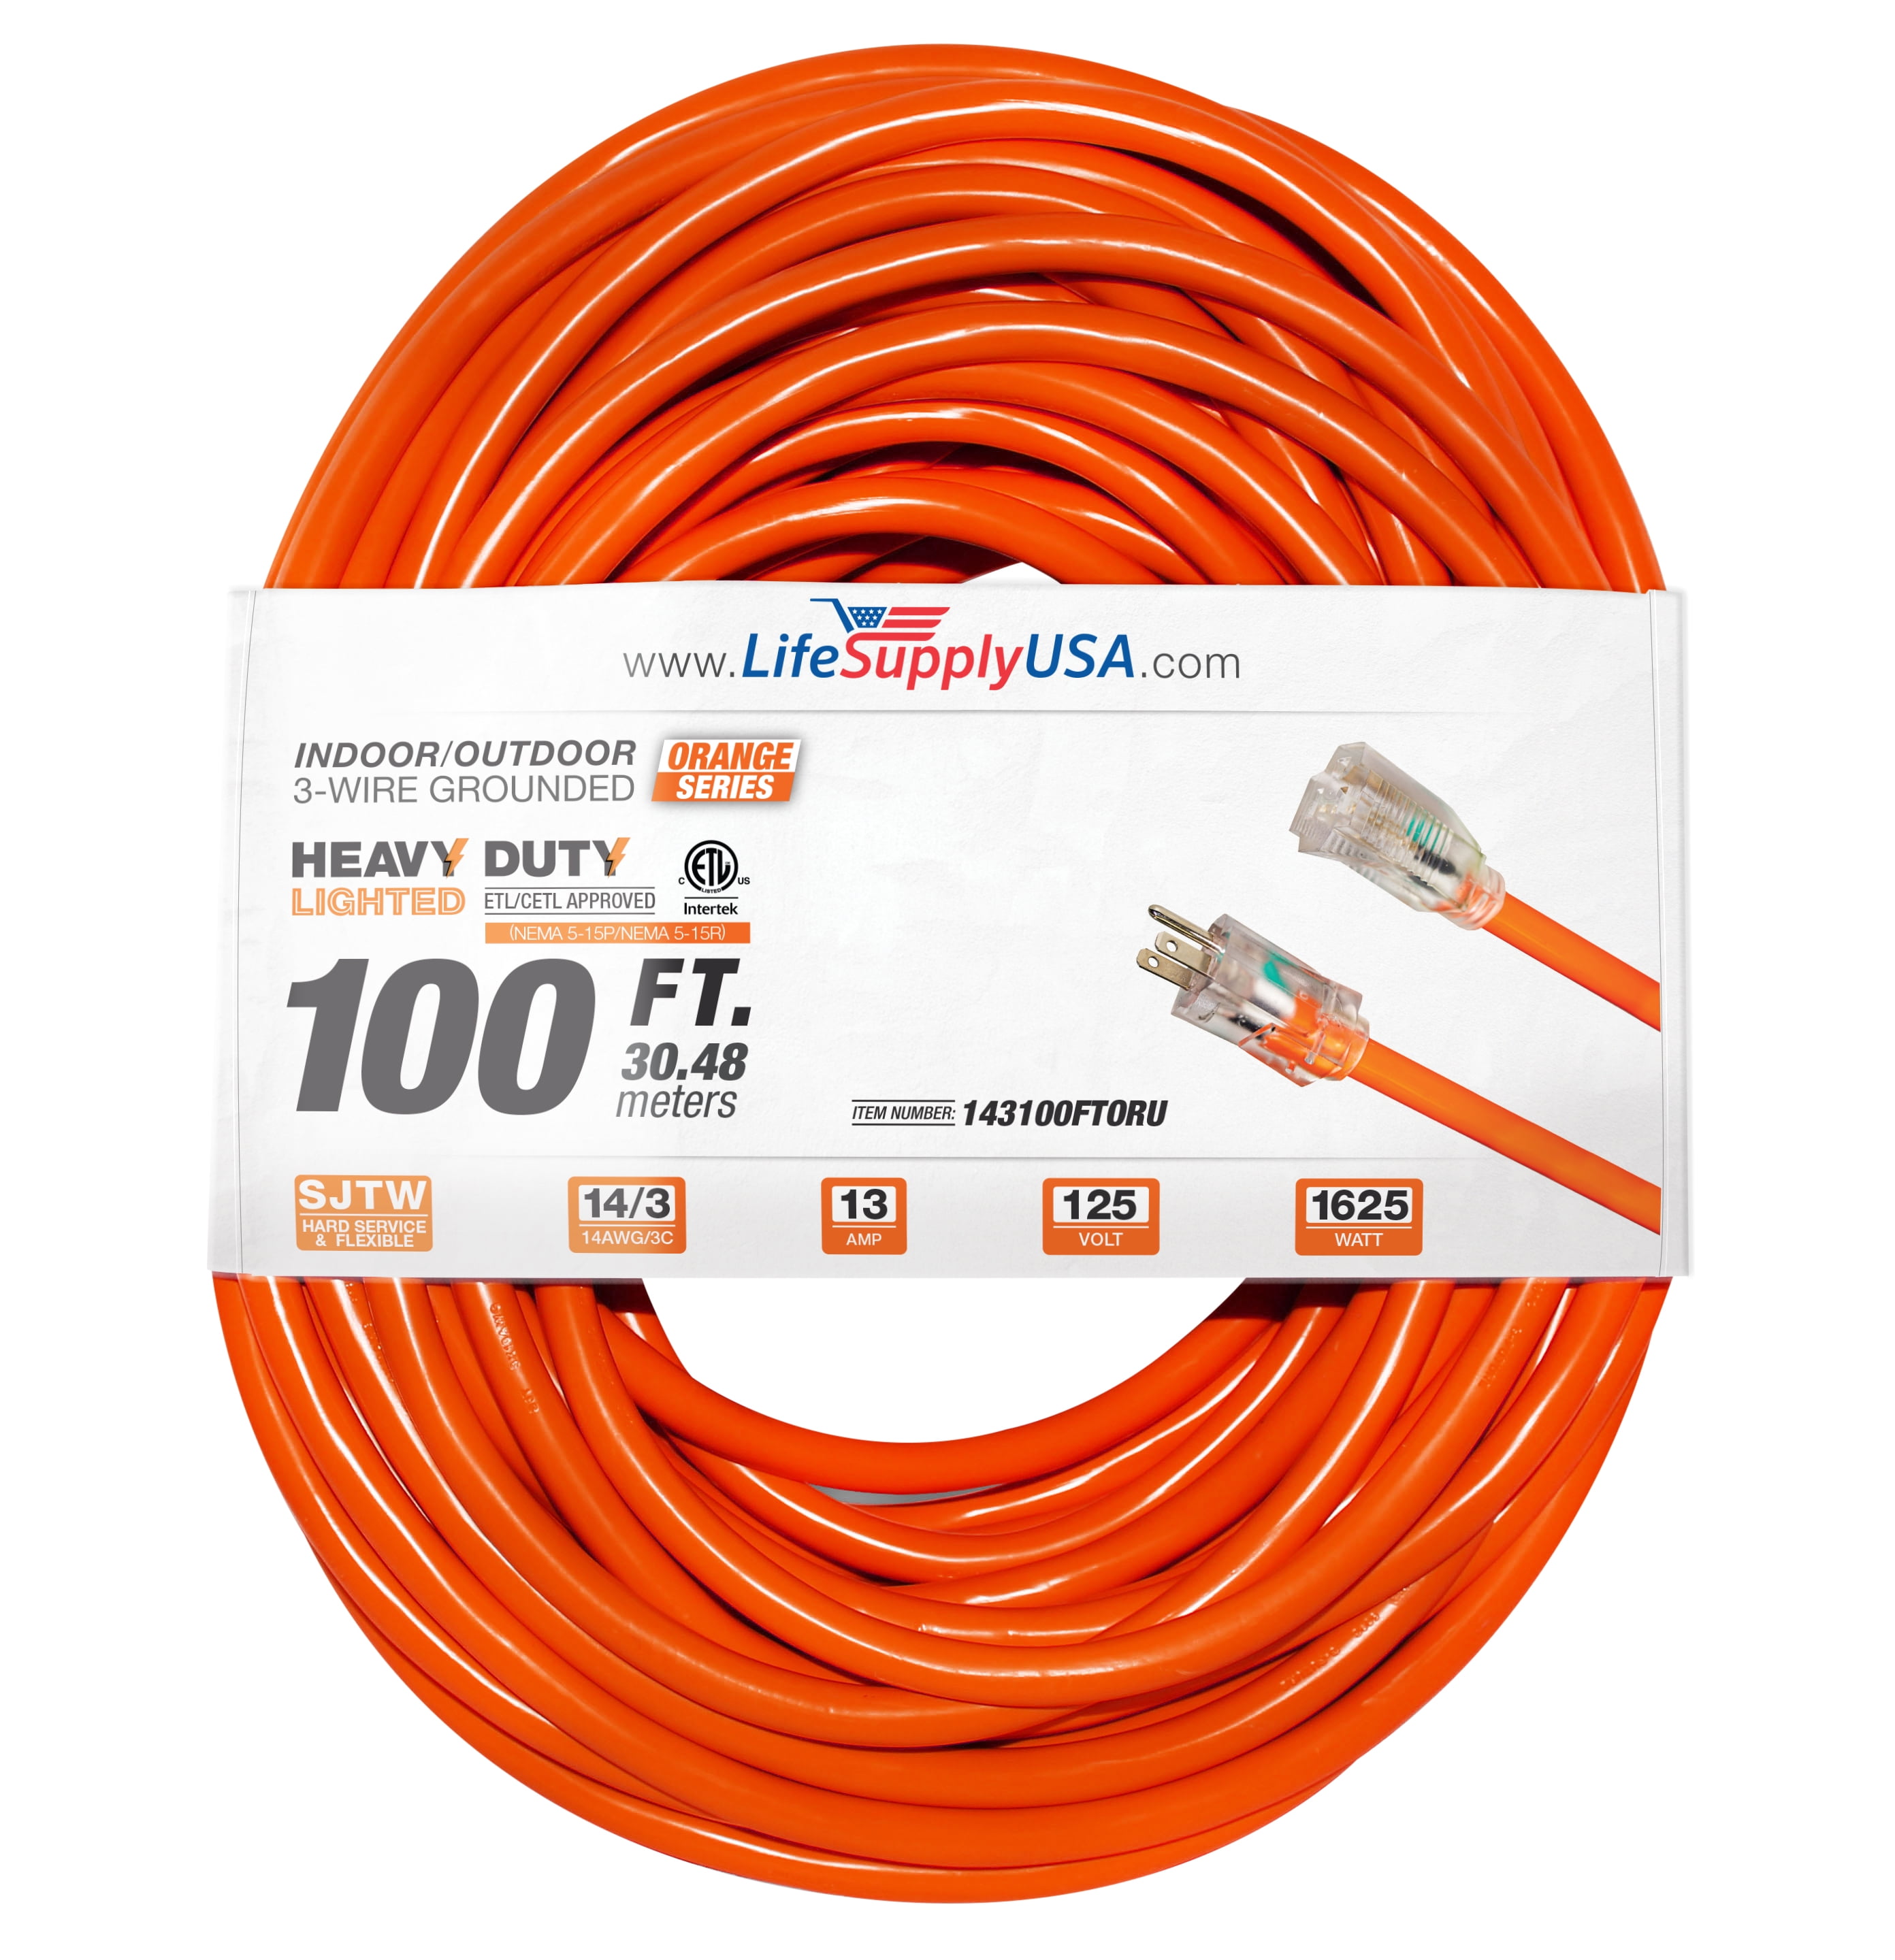 2-pack) 100 ft Power Extension Cord Outdoor  Indoor Heavy Duty 14 gauge/3  prong SJTW (Orange) Lighted end Extra Durability 13 AMP 125 Volts 1625  Watts ETL listed by LifeSupplyUSA